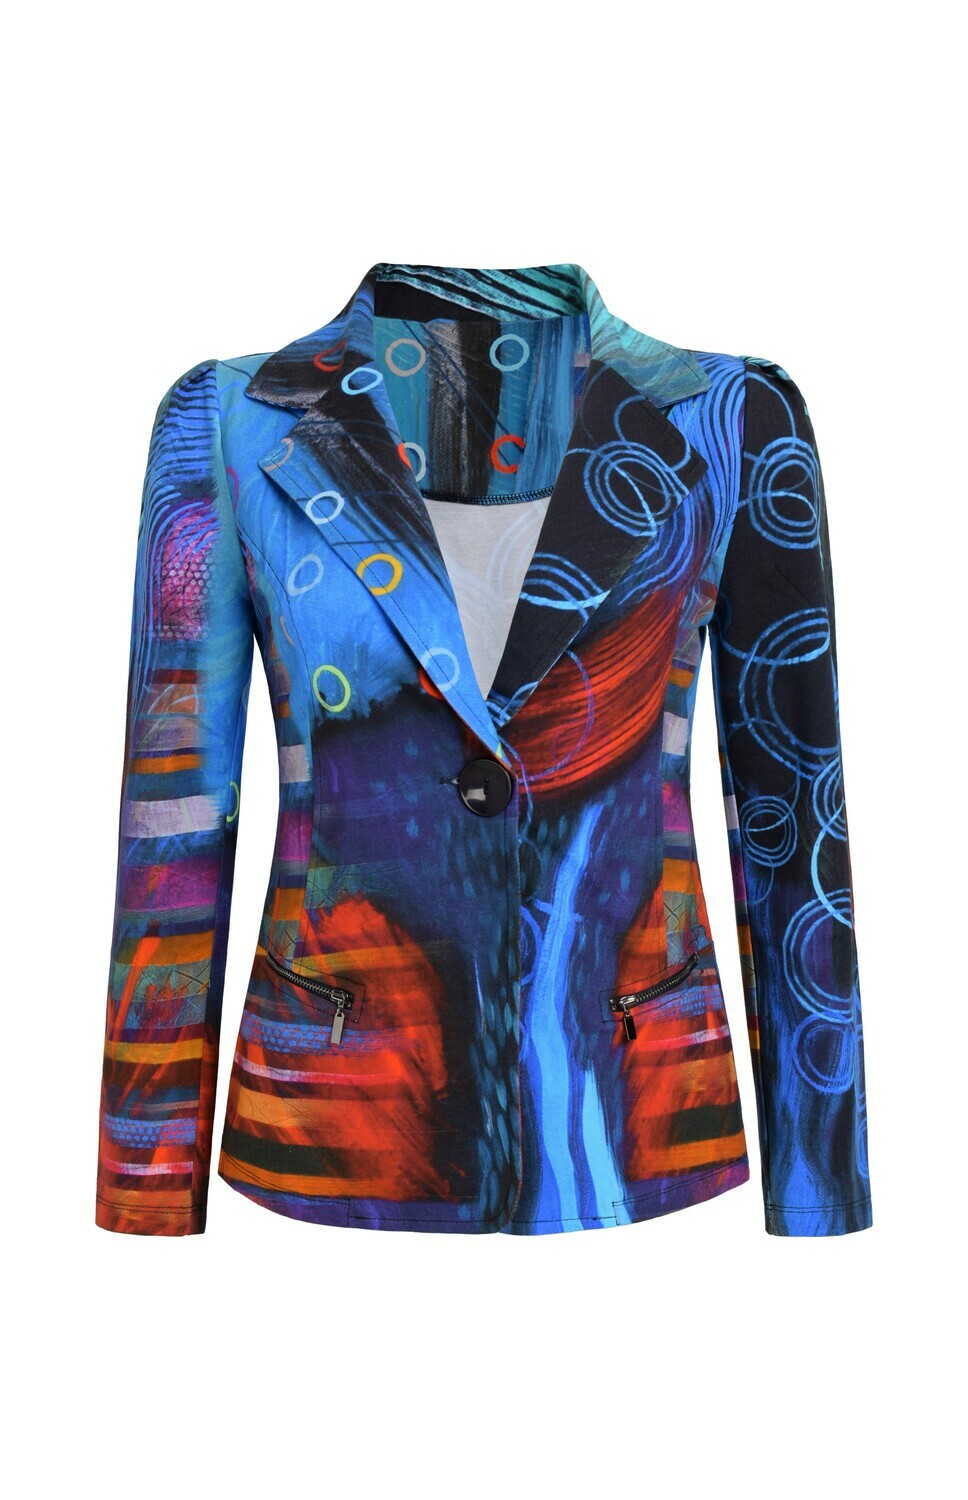 Simply Art Dolcezza: Distilling Colors Of Beauty Zip Pocket Abstract Art Blazer SOLD OUT